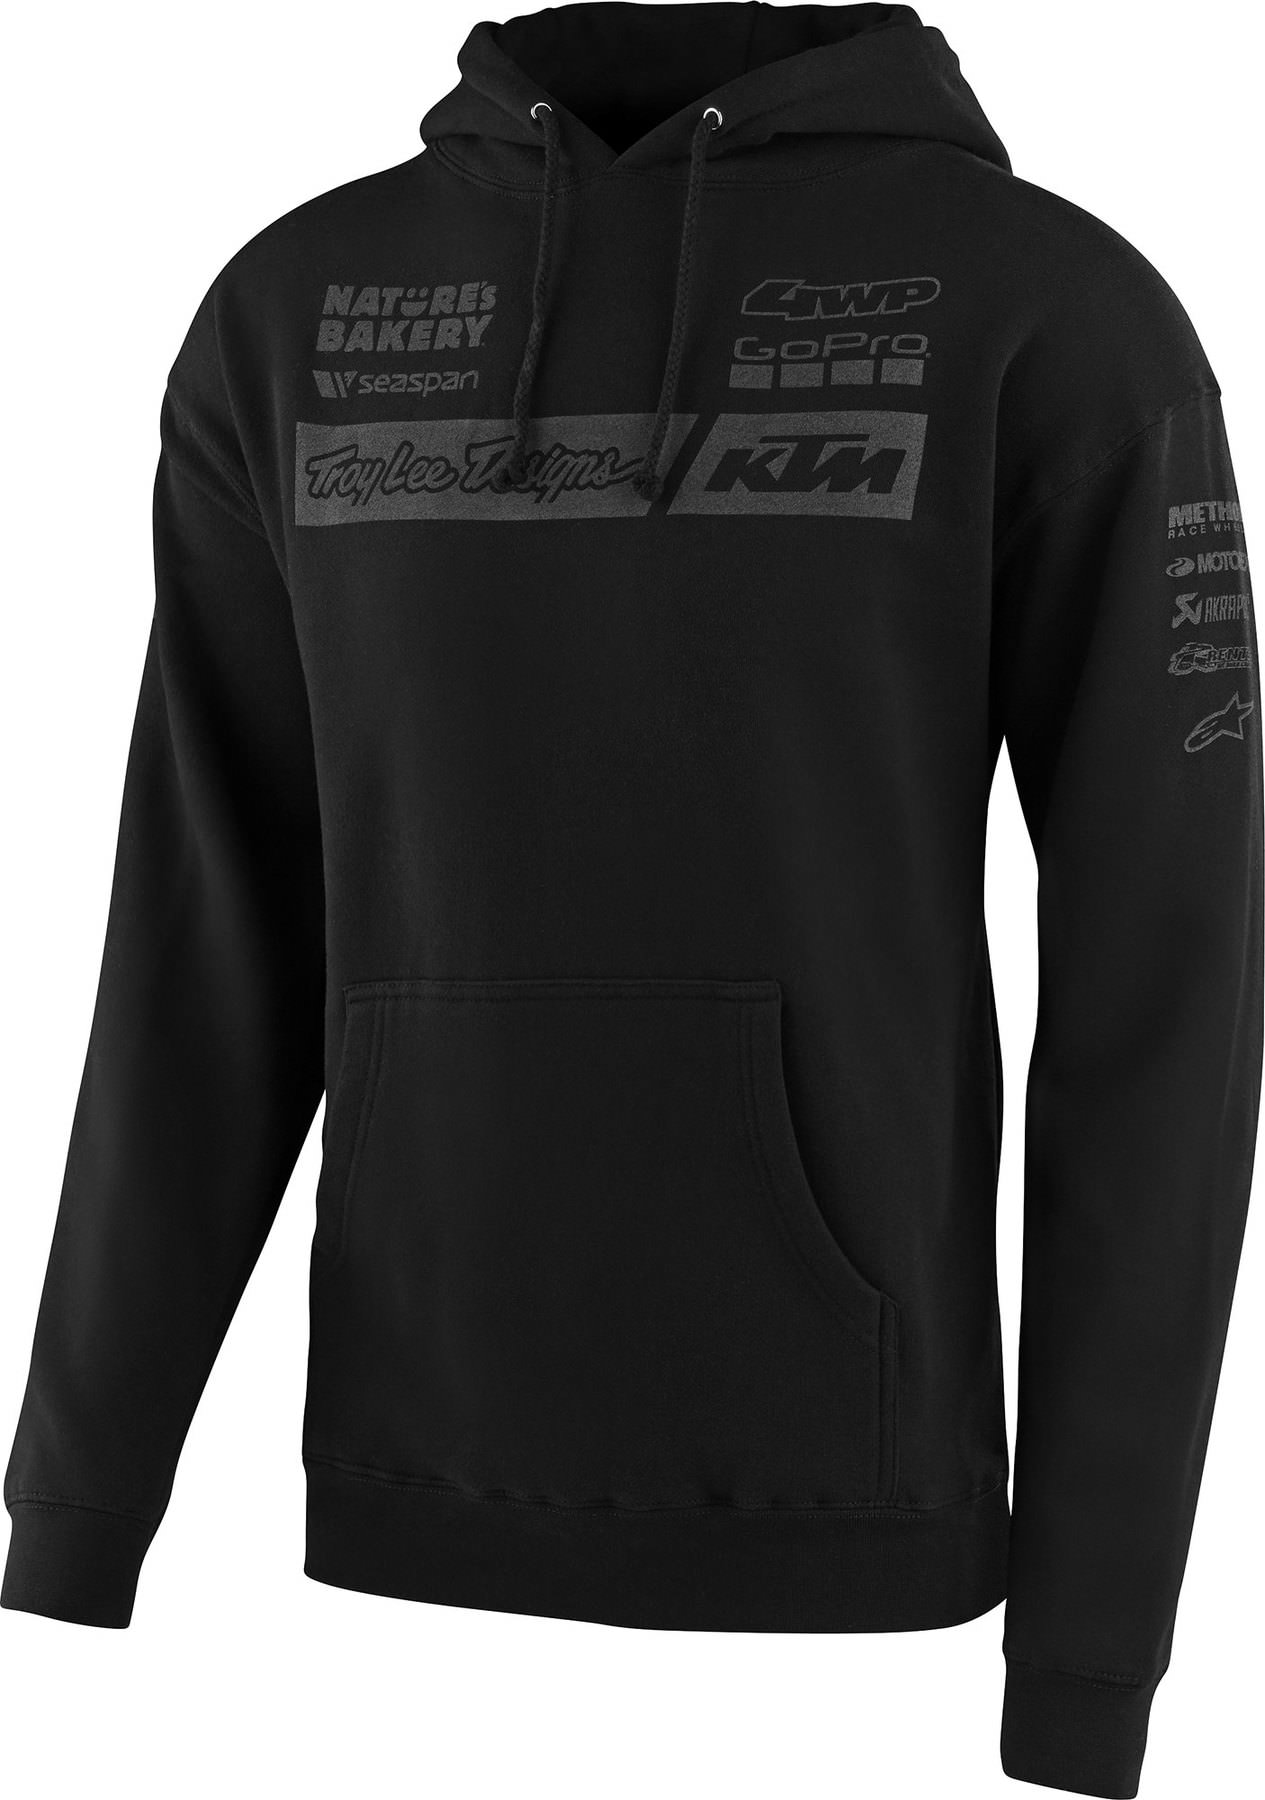 Buy Troy Lee Designs Ktm Team Pit Hoodie Louis Motorcycle Clothing And Technology,Colton Thorn Interior Design